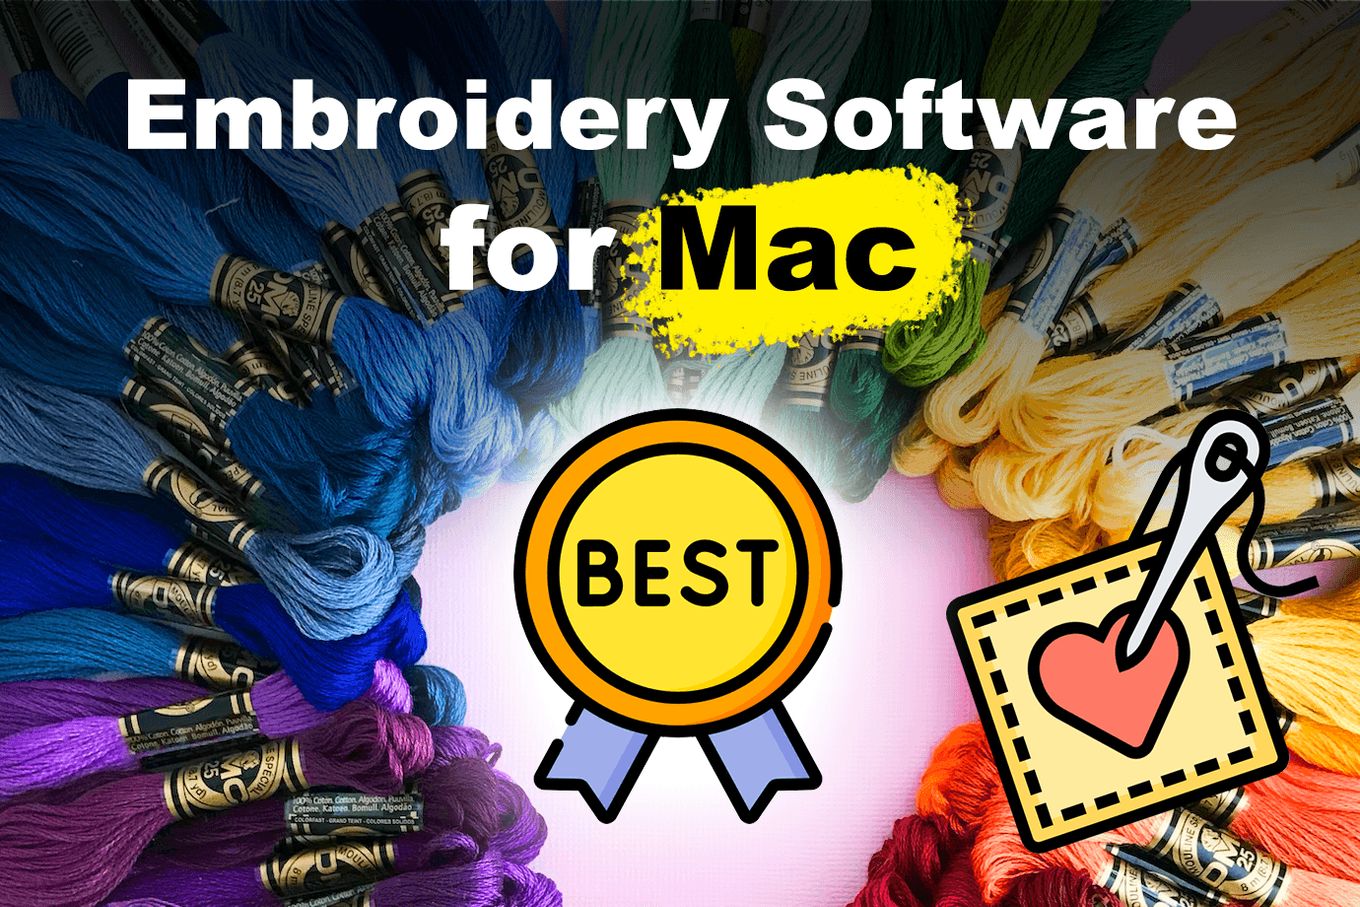 Collection of the Best Embroidery Software For Mac